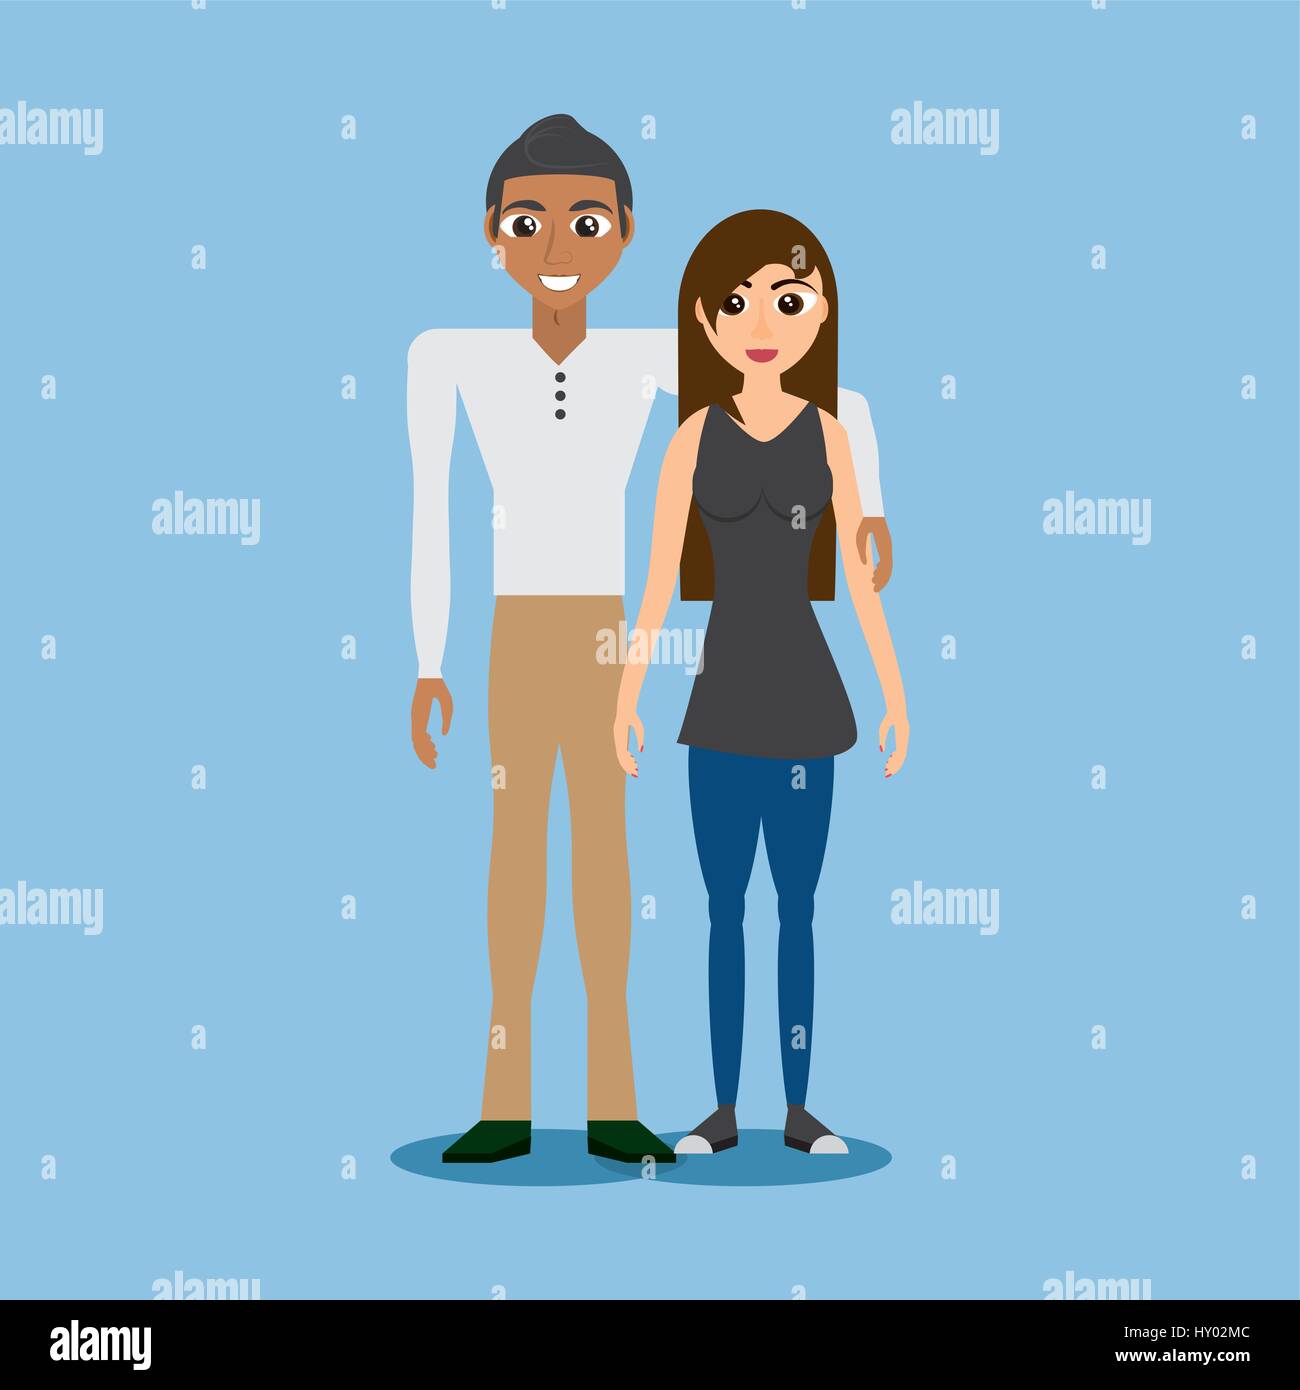 multiethnic couple together design Stock Vector